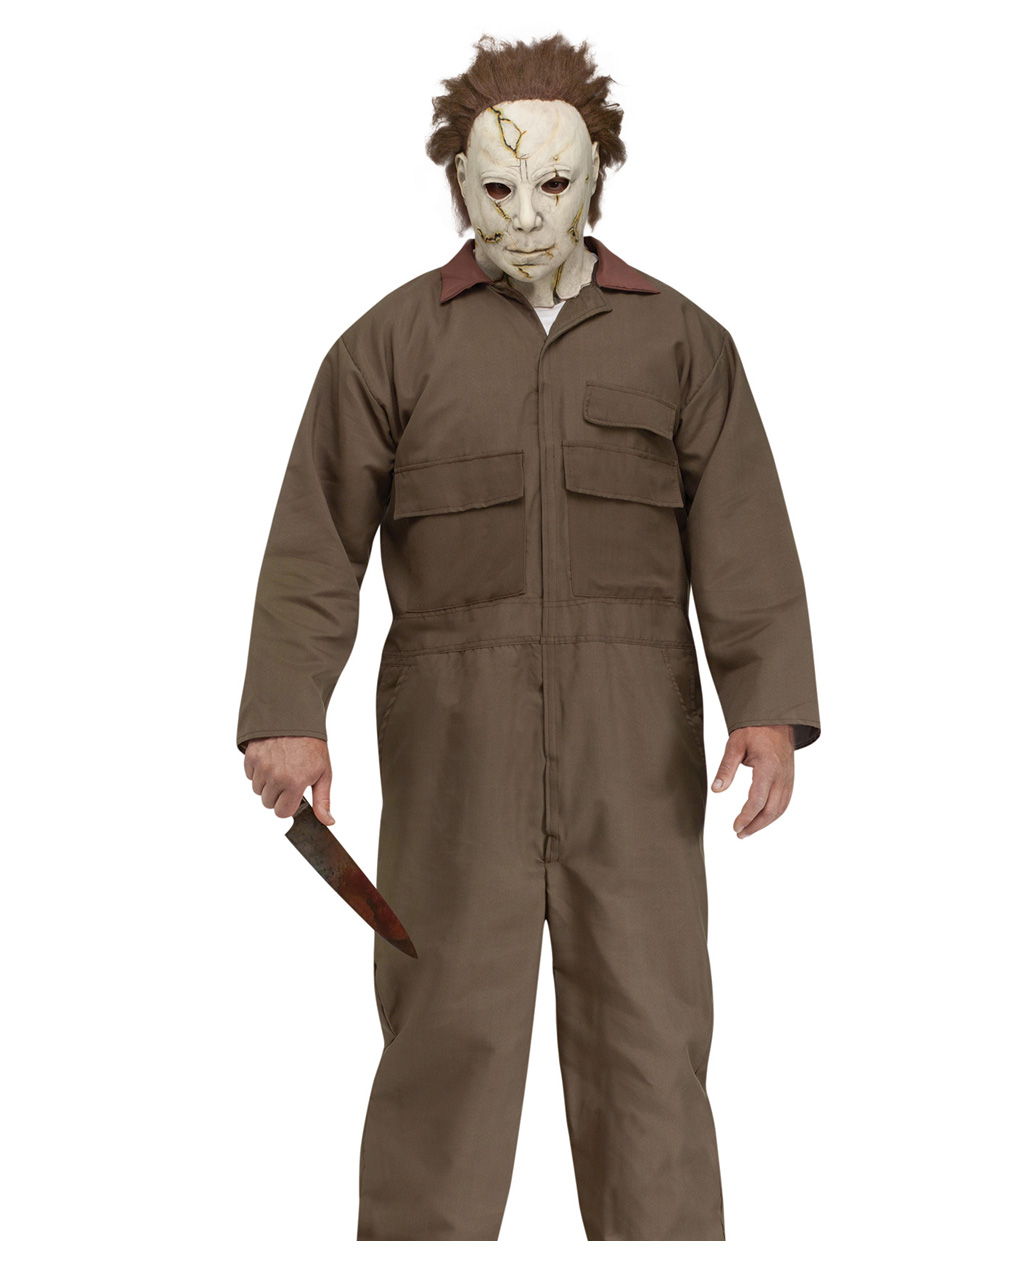 Horror Killer Cosplay Props Halloween Michael Myers Costume for Adult.